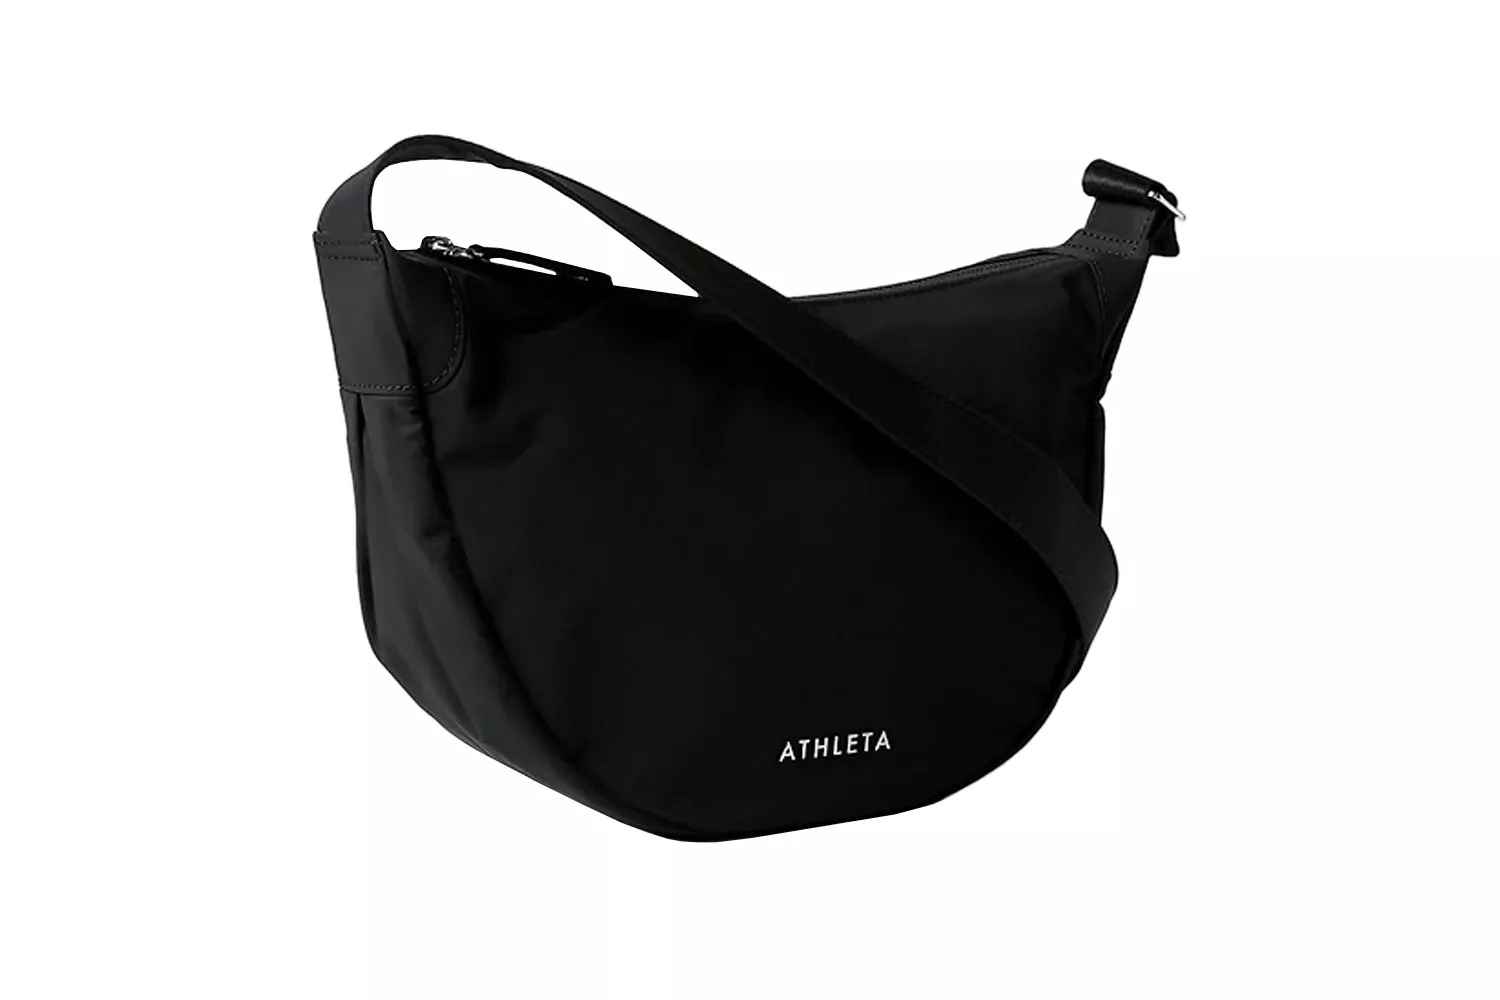 The Best Sporty Crossbody Bags that Make Your Busy Days Easier: Athleta All About Crossbody